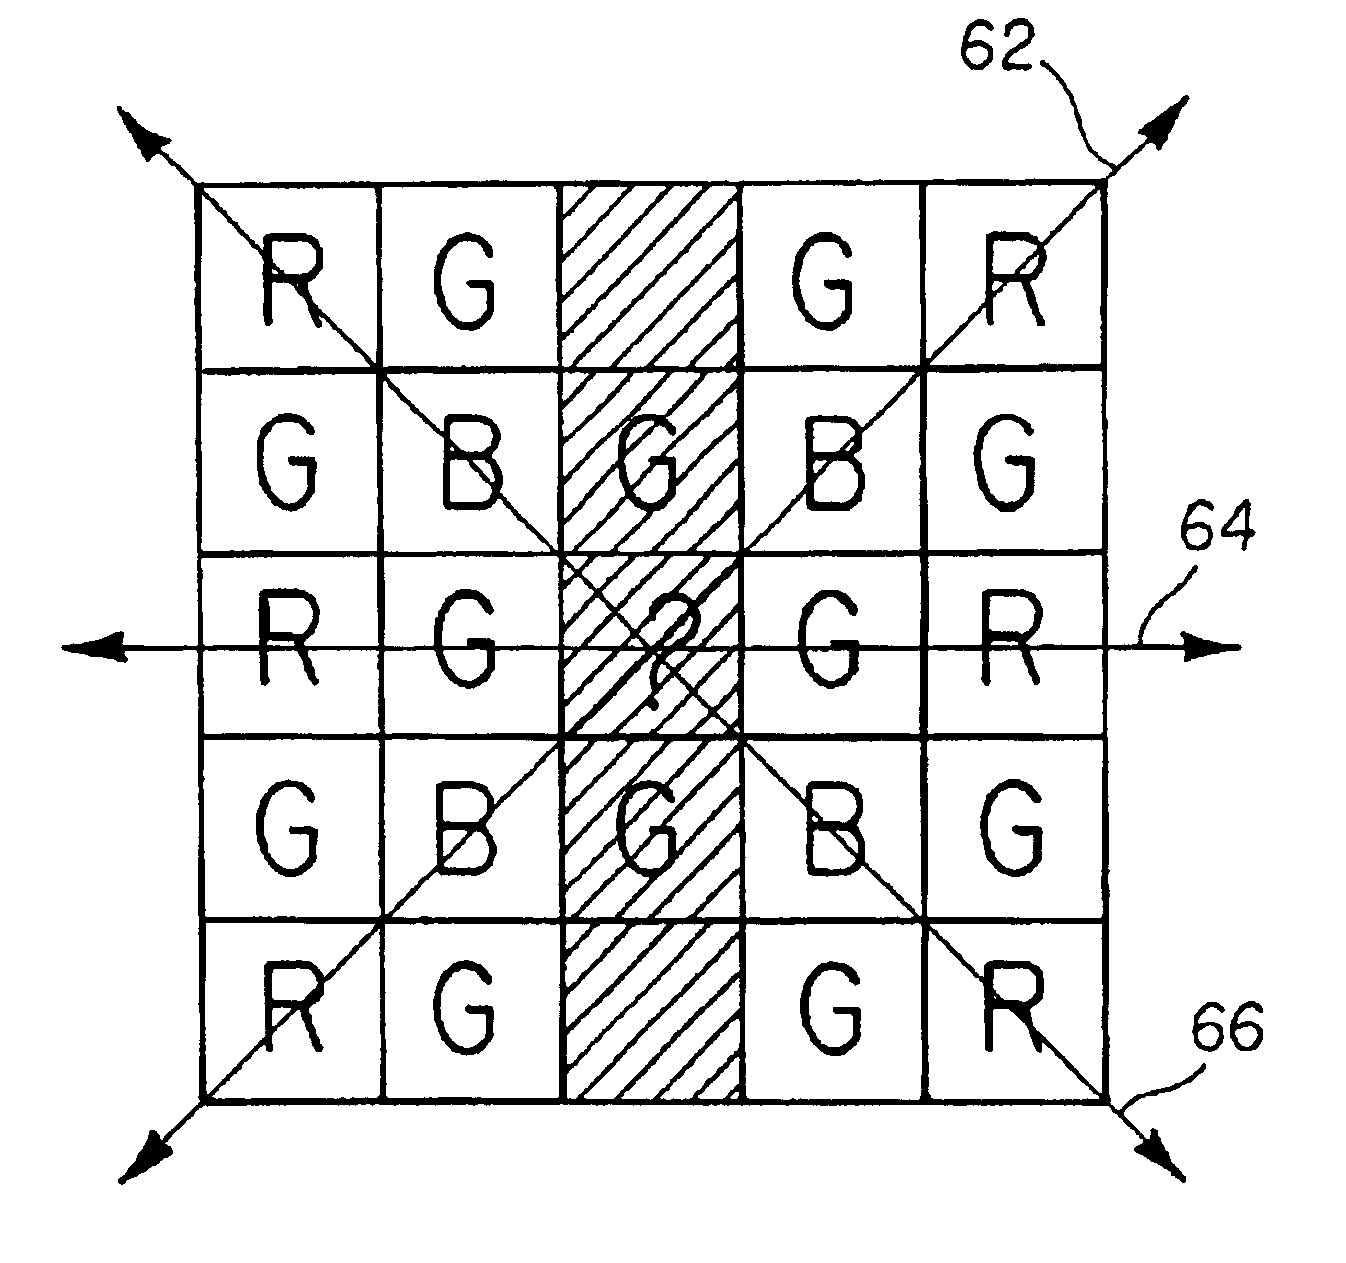 Correcting defects in a digital image caused by a pre-existing defect in a pixel of an image sensor